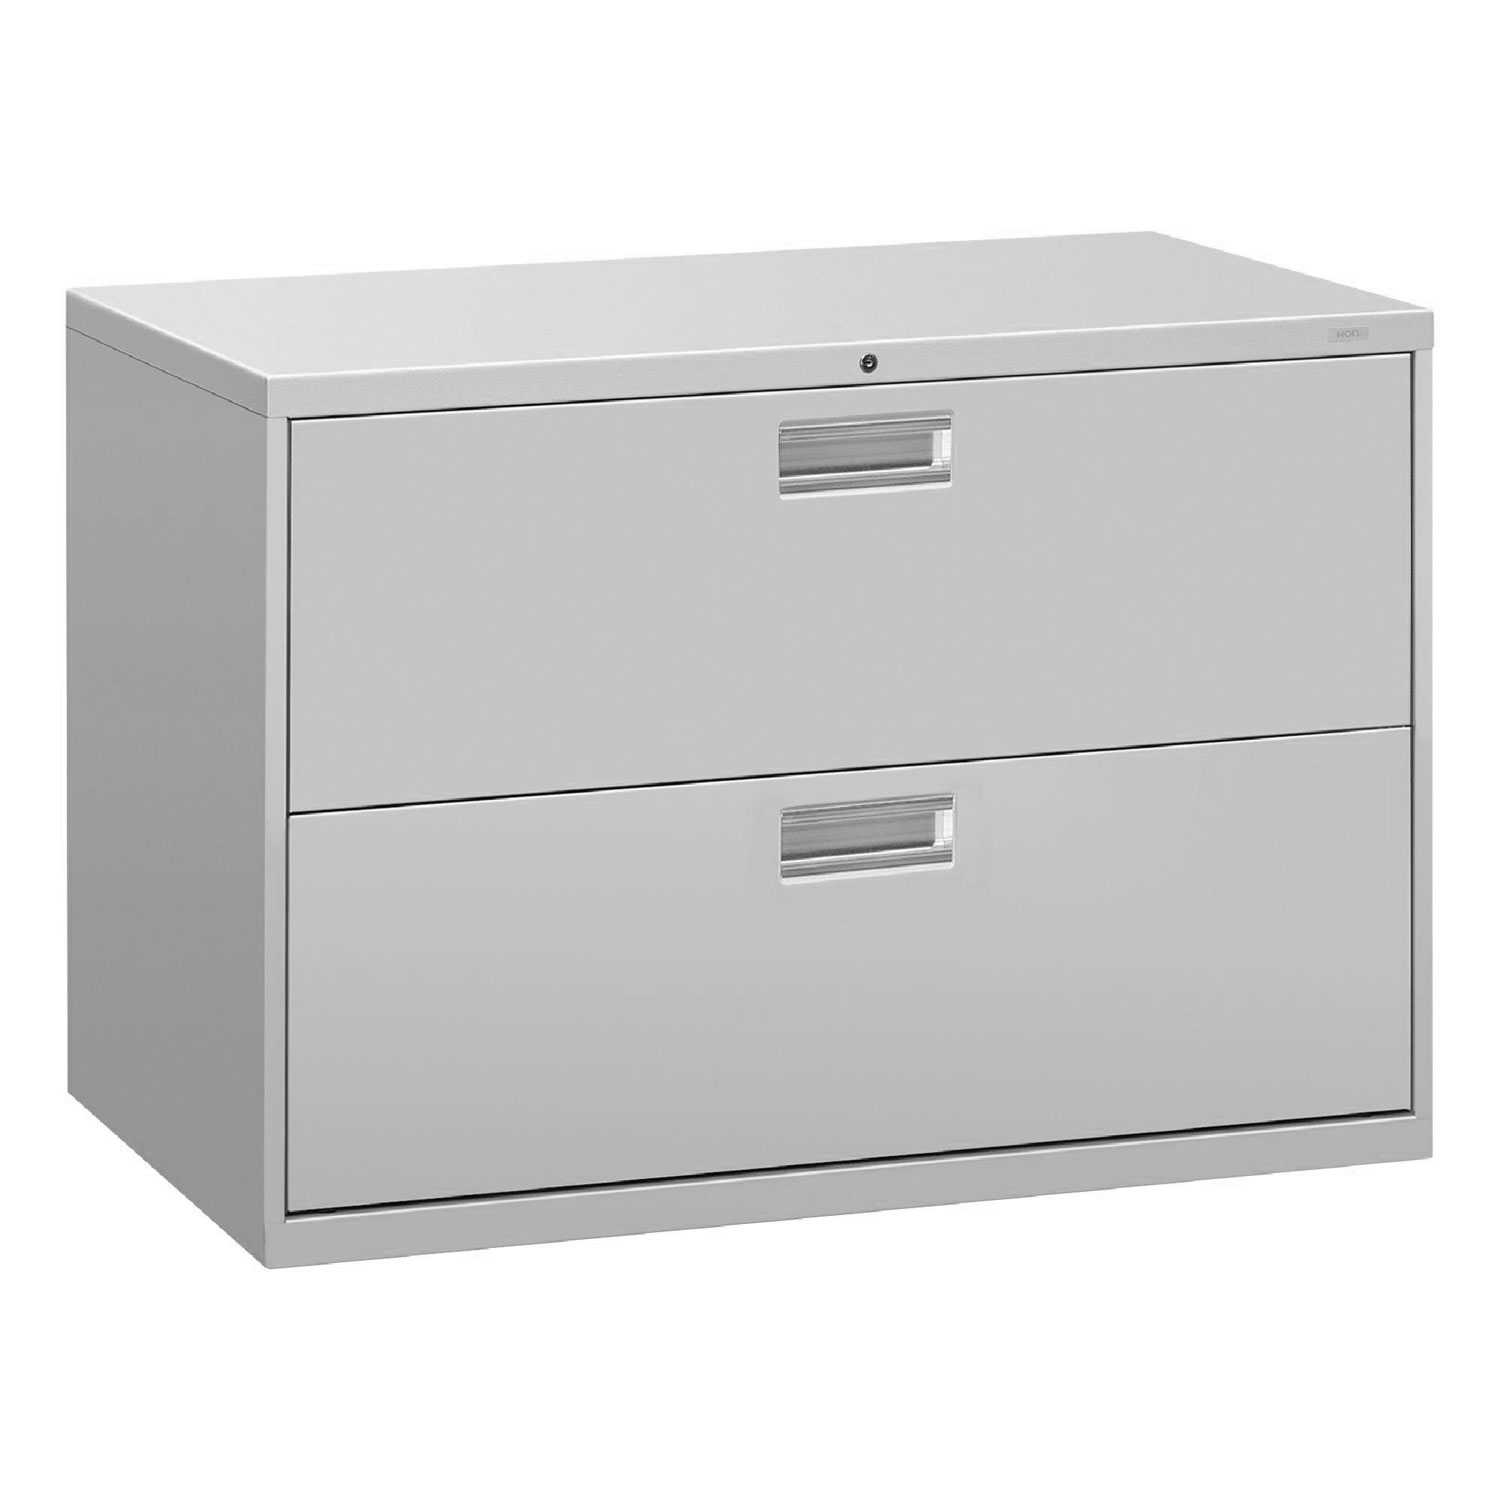 600 Series Two-Drawer Lateral File, 42w x 18d x 28h, Light Gray